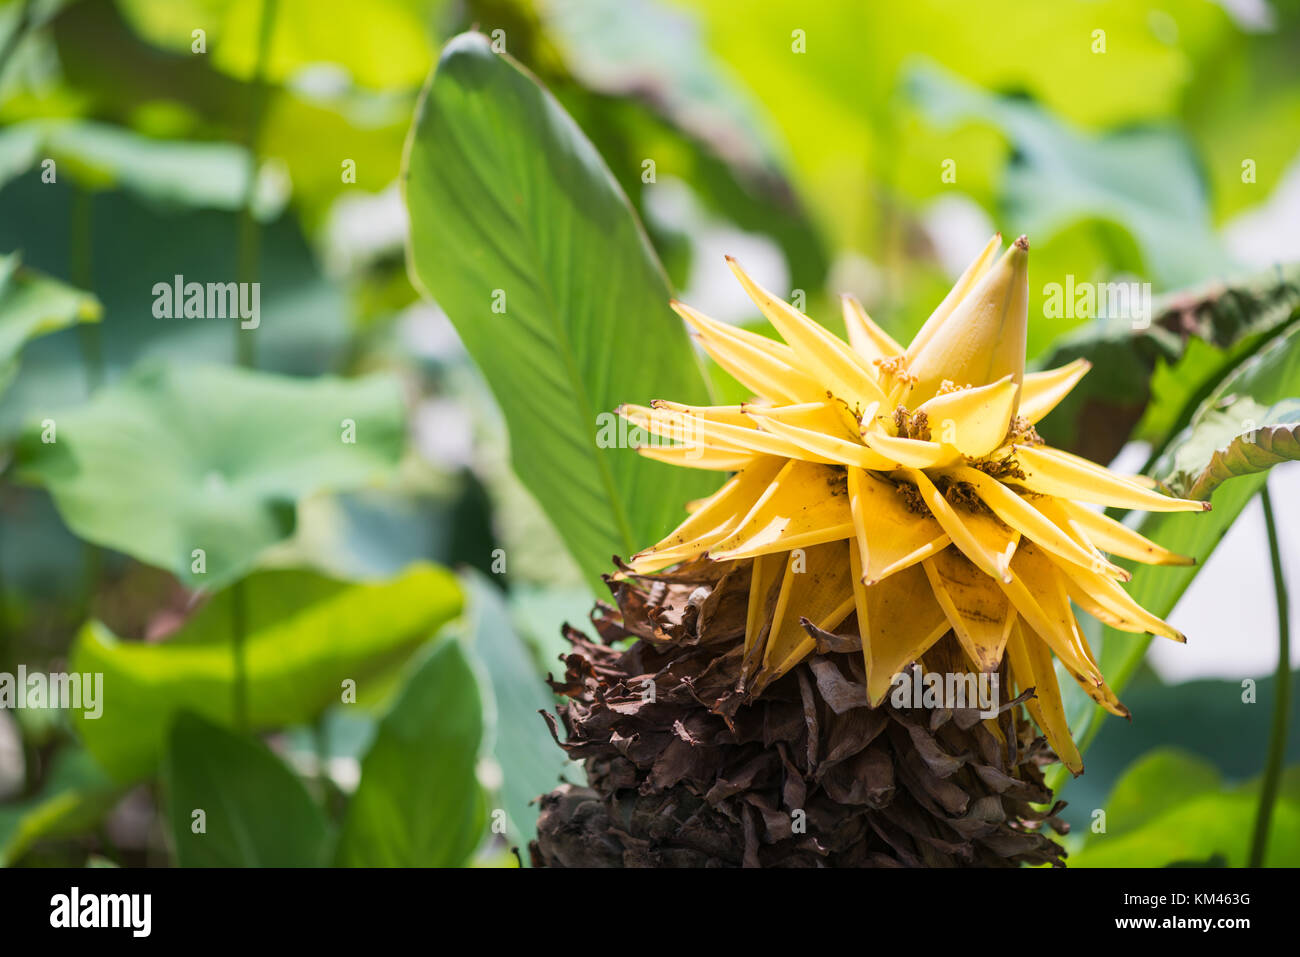 Musella lasiocarpa yellow flower from a chinese dwarf banana tree also called golden lotus with green leaves in the background, Chengdu, China Stock Photo